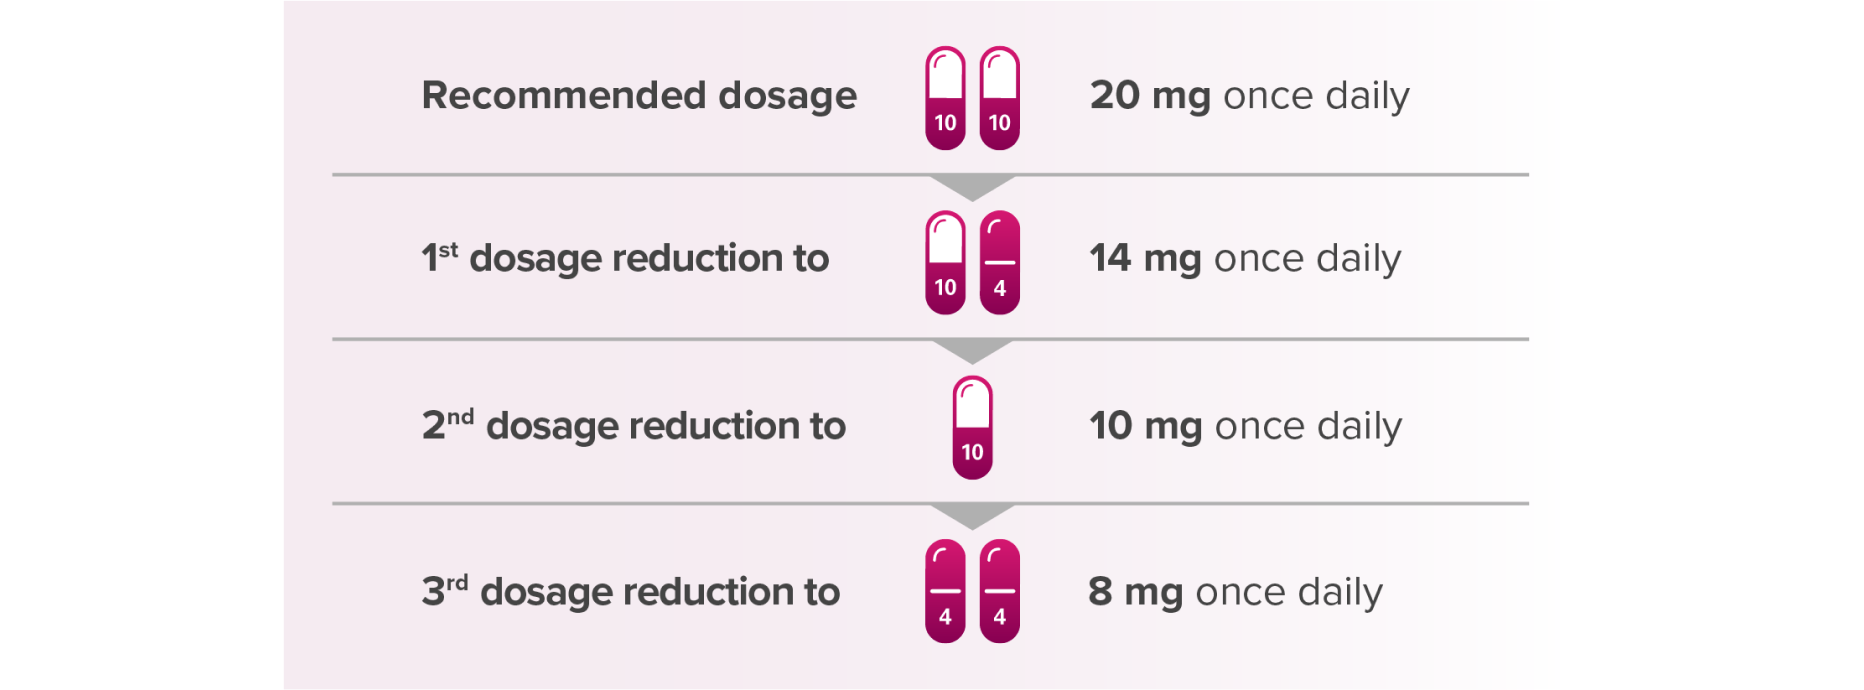 Recommended Dosage Reductions for LENVIMA® (lenvatinib)